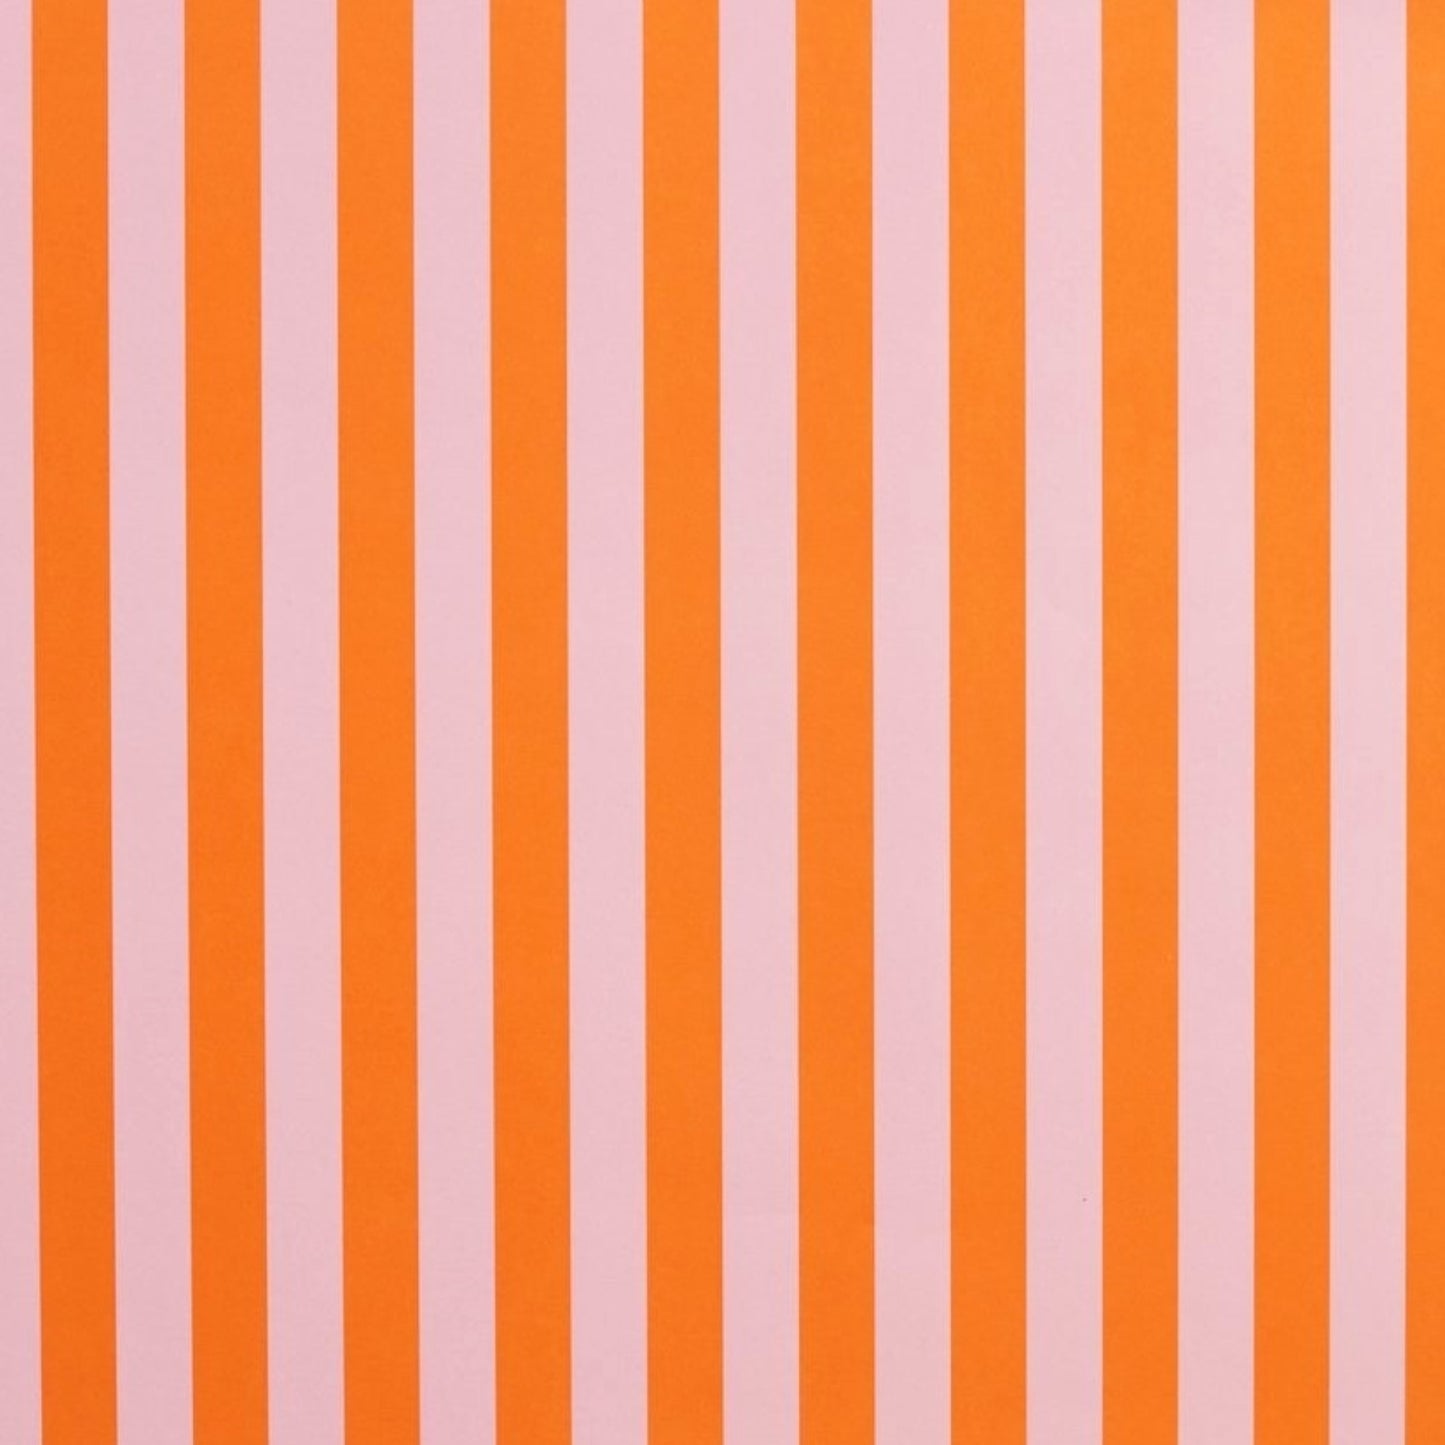 wide classic stripe wrapping paper in orange and pink by Heather Evelyn